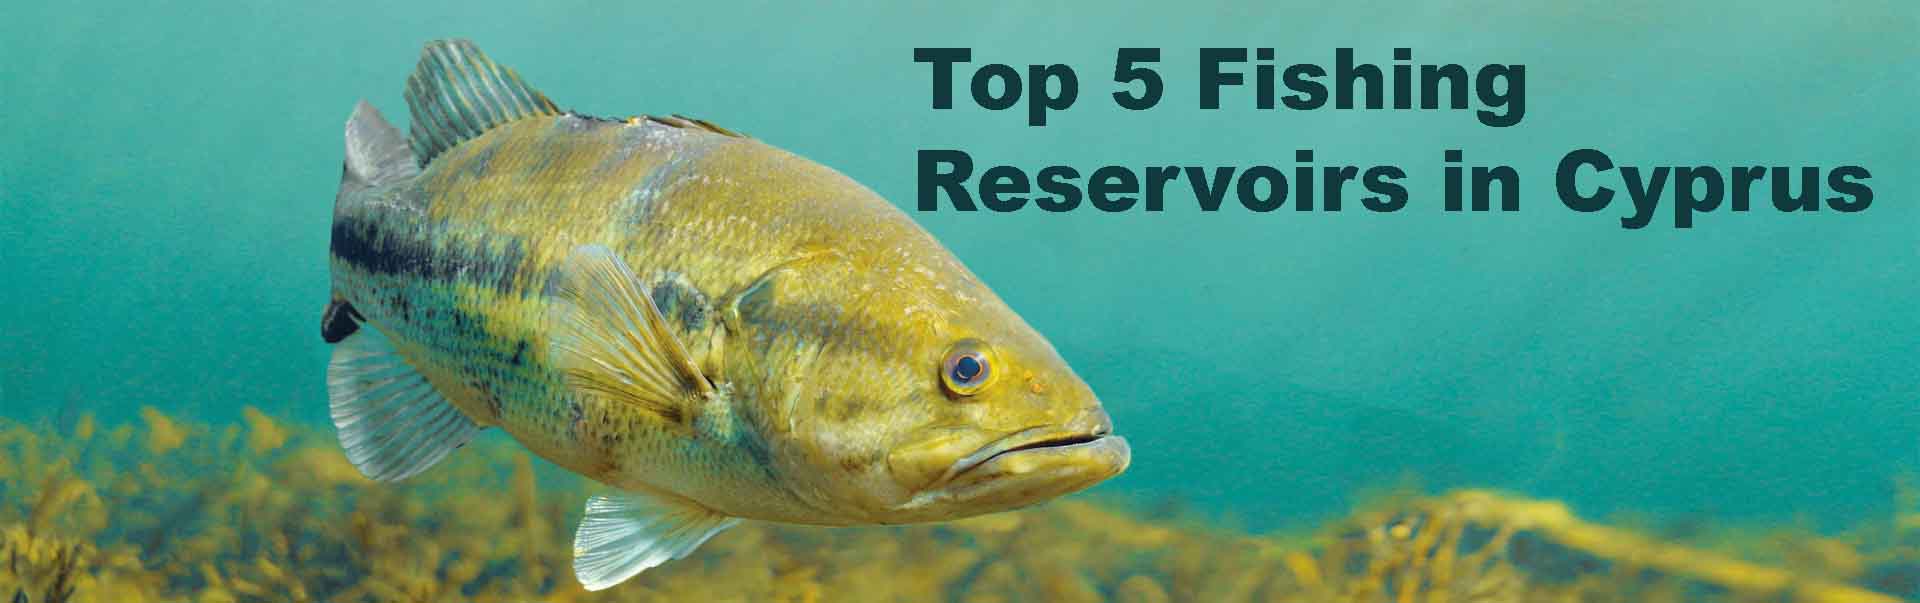 5 Best Fresh Water Fishing Reservoirs-Our Way of Life in Cyprus